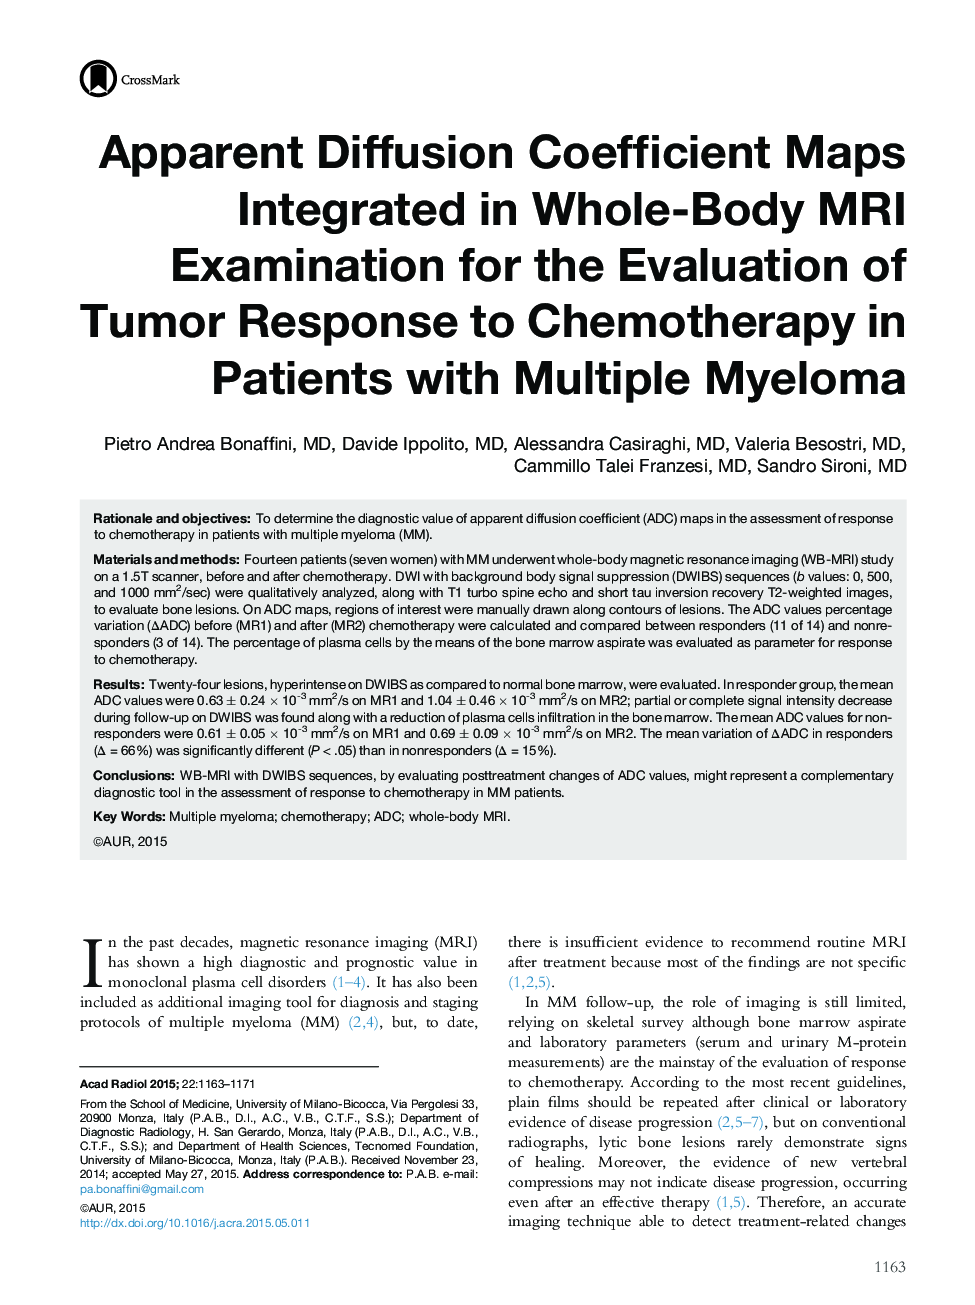 Apparent Diffusion Coefficient Maps Integrated in Whole-Body MRI Examination for the Evaluation of Tumor Response to Chemotherapy in Patients with Multiple Myeloma